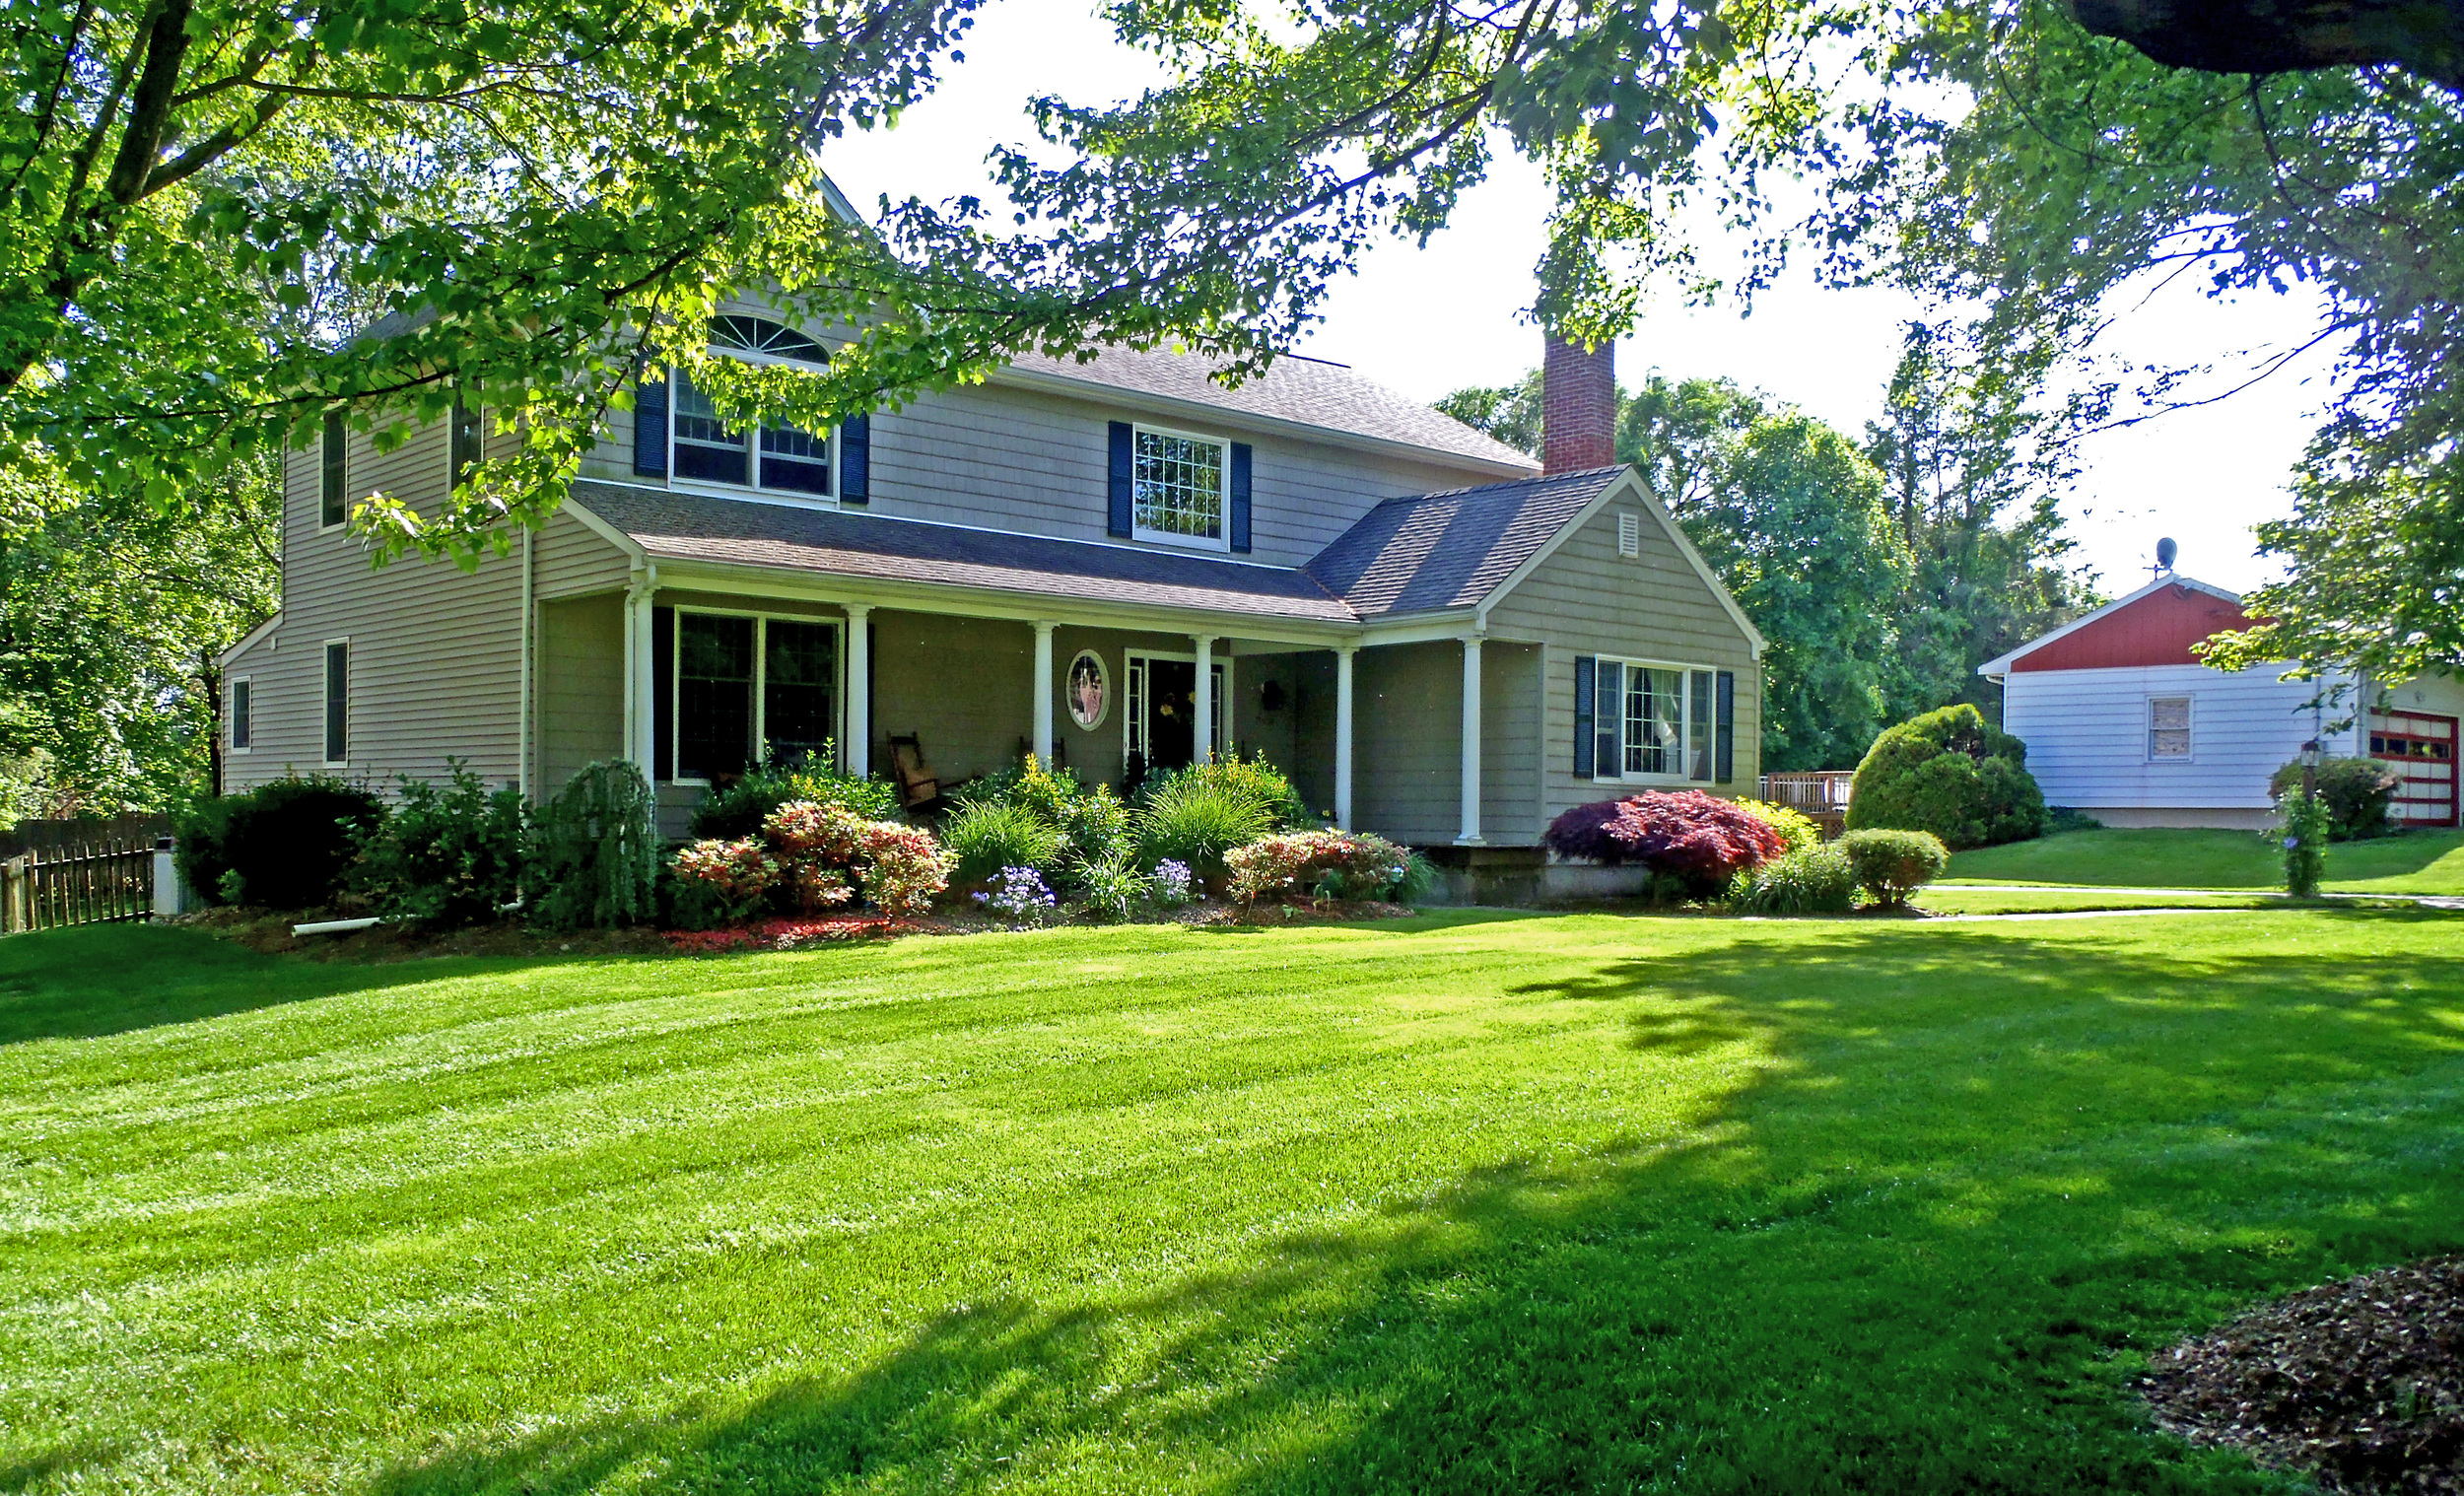 Simcut Lawn Care, A & A Lawn Care & Landscaping